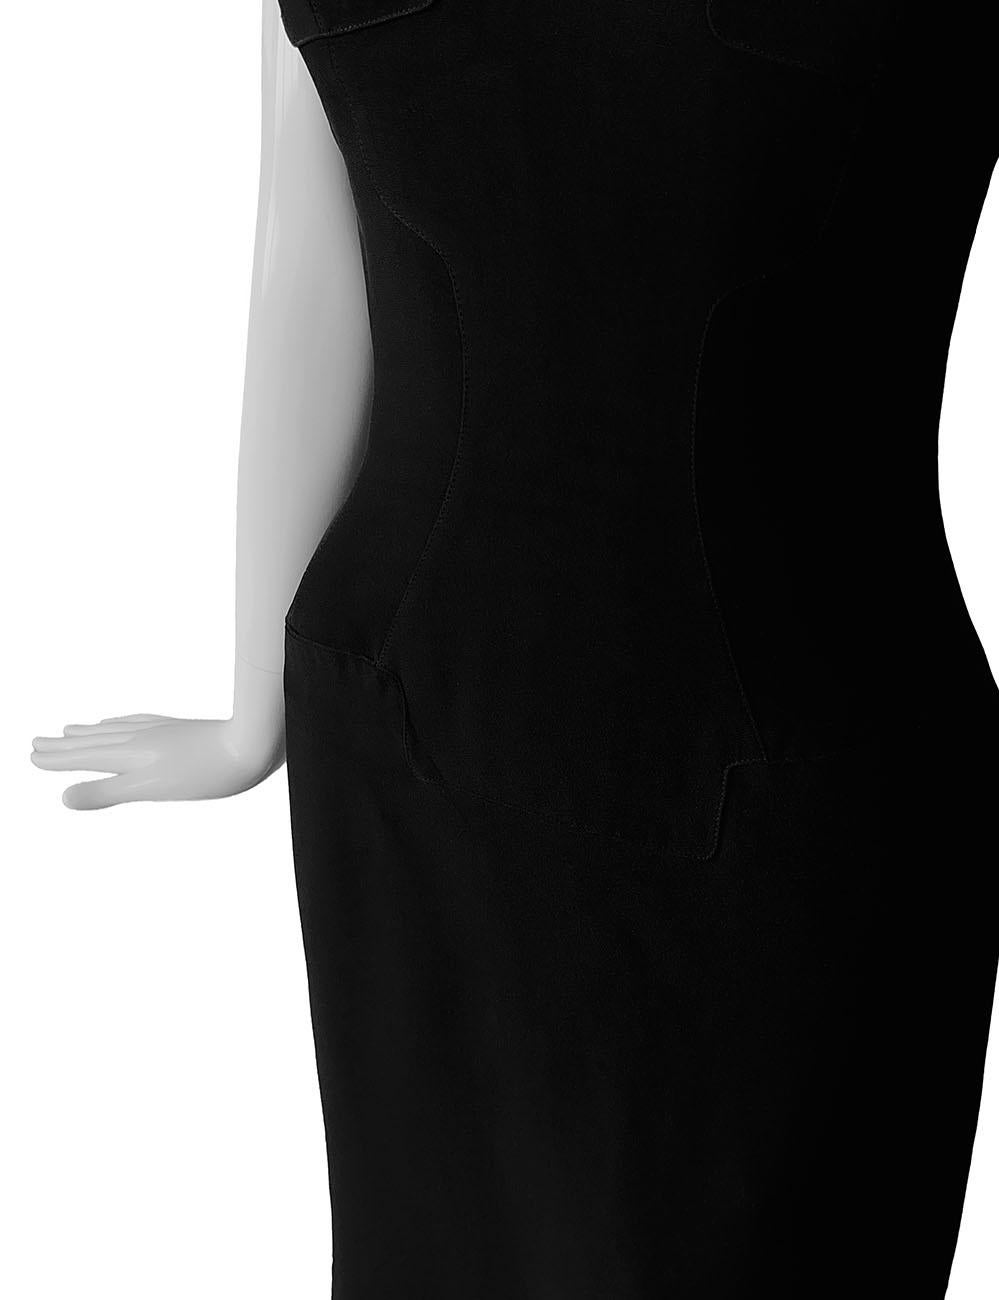 Rare Hot Thierry Mugler Dress SS1994 iconic Black Dress  For Sale 3